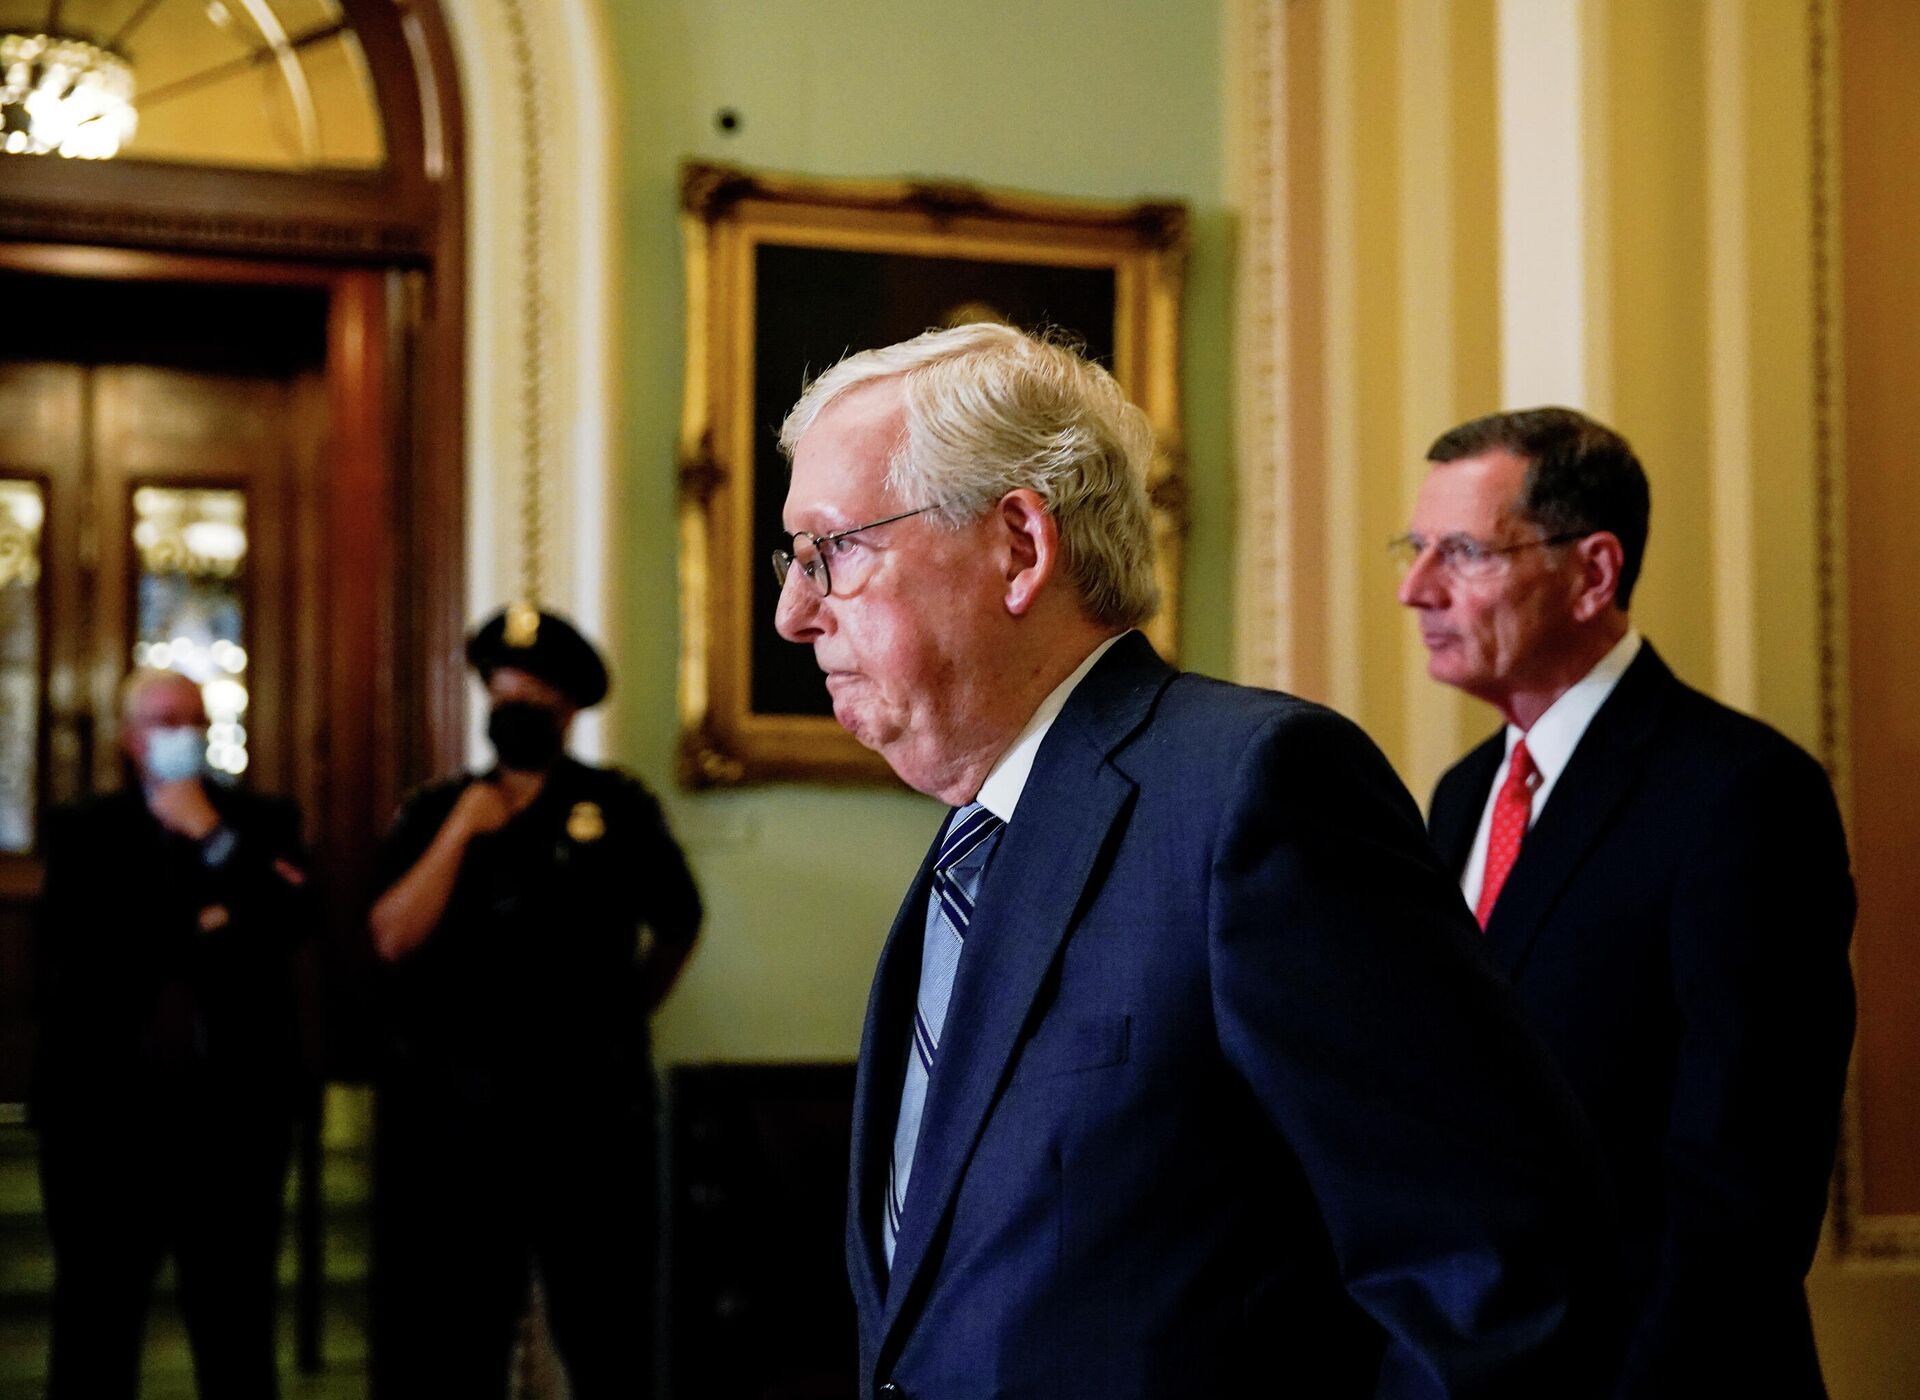 U.S. Senate Republican Leader Mitch McConnell (R-KY) is followed by Senator John Barrasso (R-WY) prior to the Senate Republicans weekly policy lunch at the U.S. Capitol in Washington, U.S., September 28, 2021. - Sputnik International, 1920, 07.10.2021